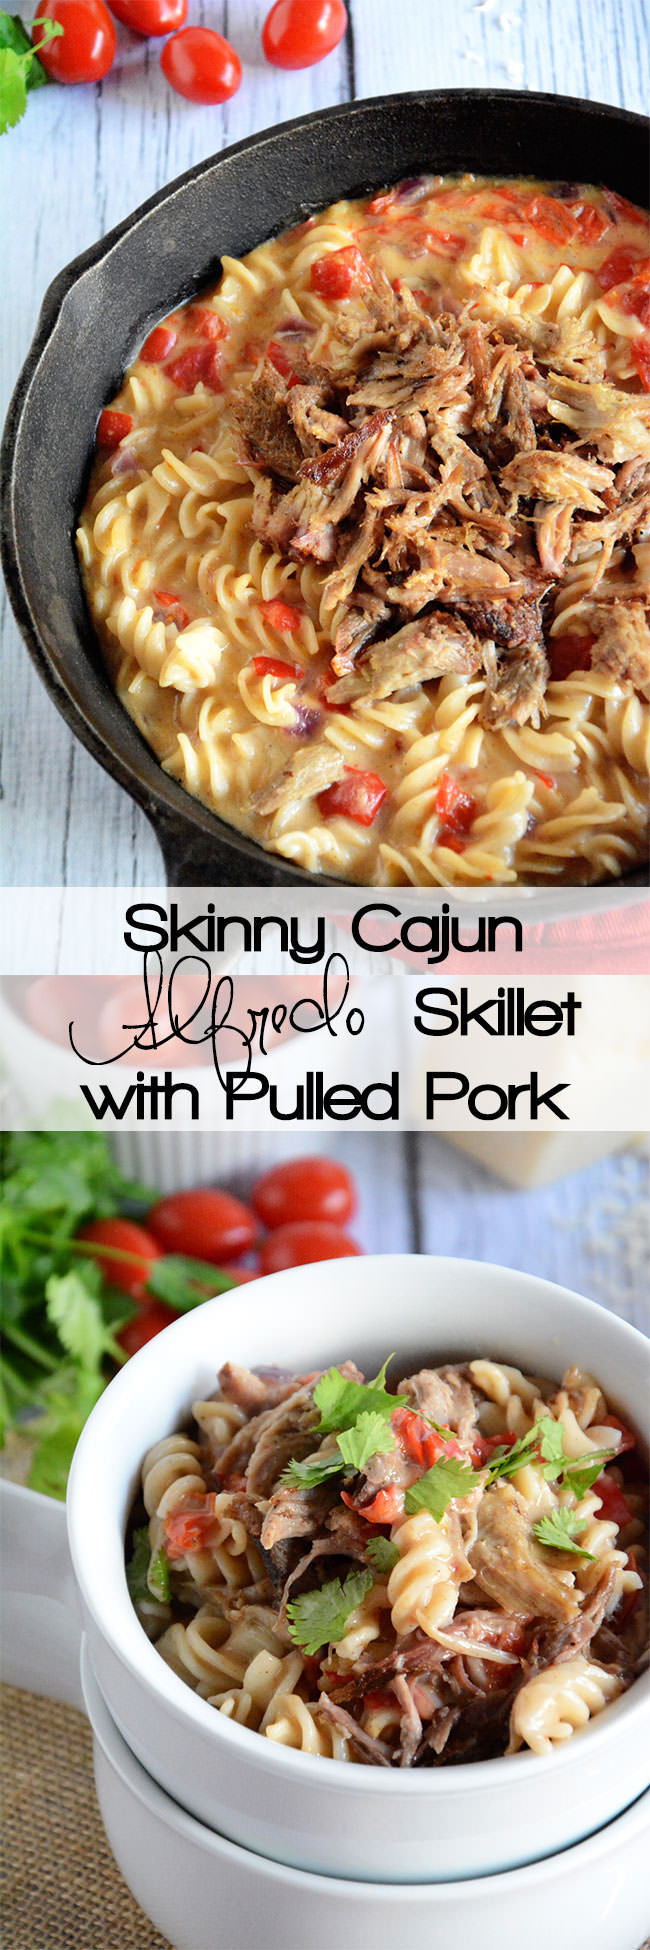 A creamy cajun alfredo sauce that comes together in minutes and topped with pulled pork is a quick and healthy dinner!